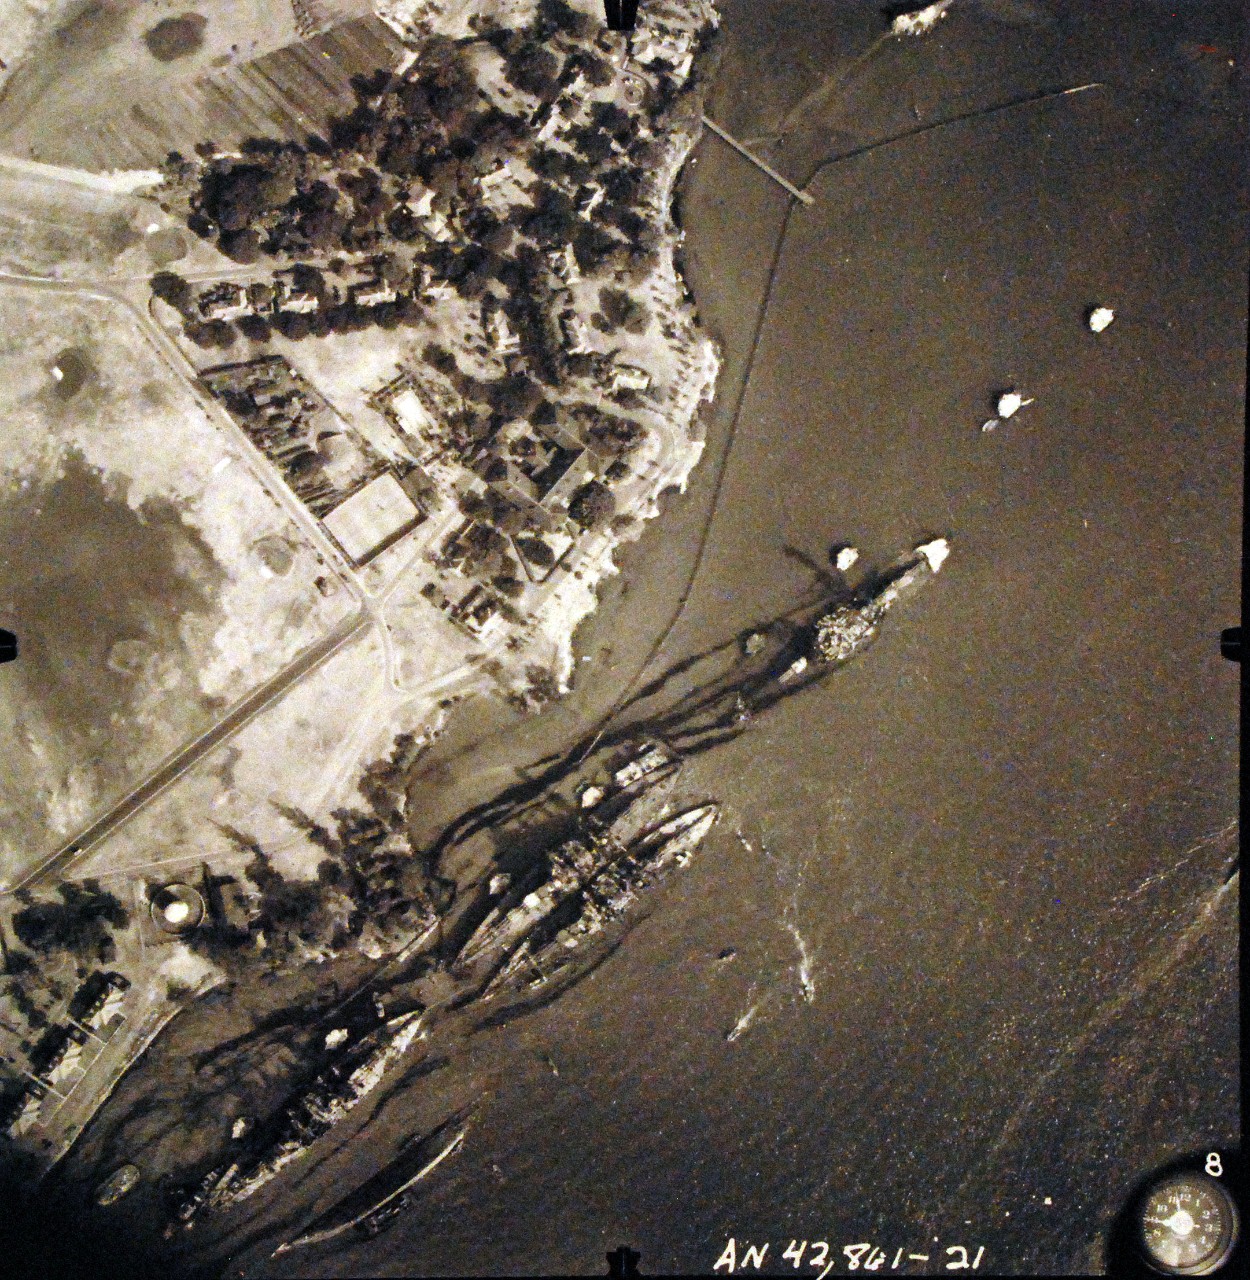 80-G-387582:  Pearl Harbor Attack, 7 December 1941.  Aerial view of "Battleship Row" moorings on the southern side of Ford Island, 10 December 1941, showing damage from the Japanese raid three days earlier.  Diagonally, from left center to lower right are: USS Maryland (BB-46), lightly damaged, with the capsized USS Oklahoma (BB-37) outboard. USS Tennessee (BB-43), lightly damaged, with the sunken USS West Virginia (BB-48) outboard. USS Arizona (BB-39), sunk, with her hull shattered by the explosion of the magazines below the two forward turrets. Note dark oil streaks on the harbor surface, originating from the sunken battleships. Photographed by VJ-1 at an altitude of 3,000 feet and released November 9, 1950.  U.S. Navy photograph, now in the collections of the National Archives.       (9/22/2015).